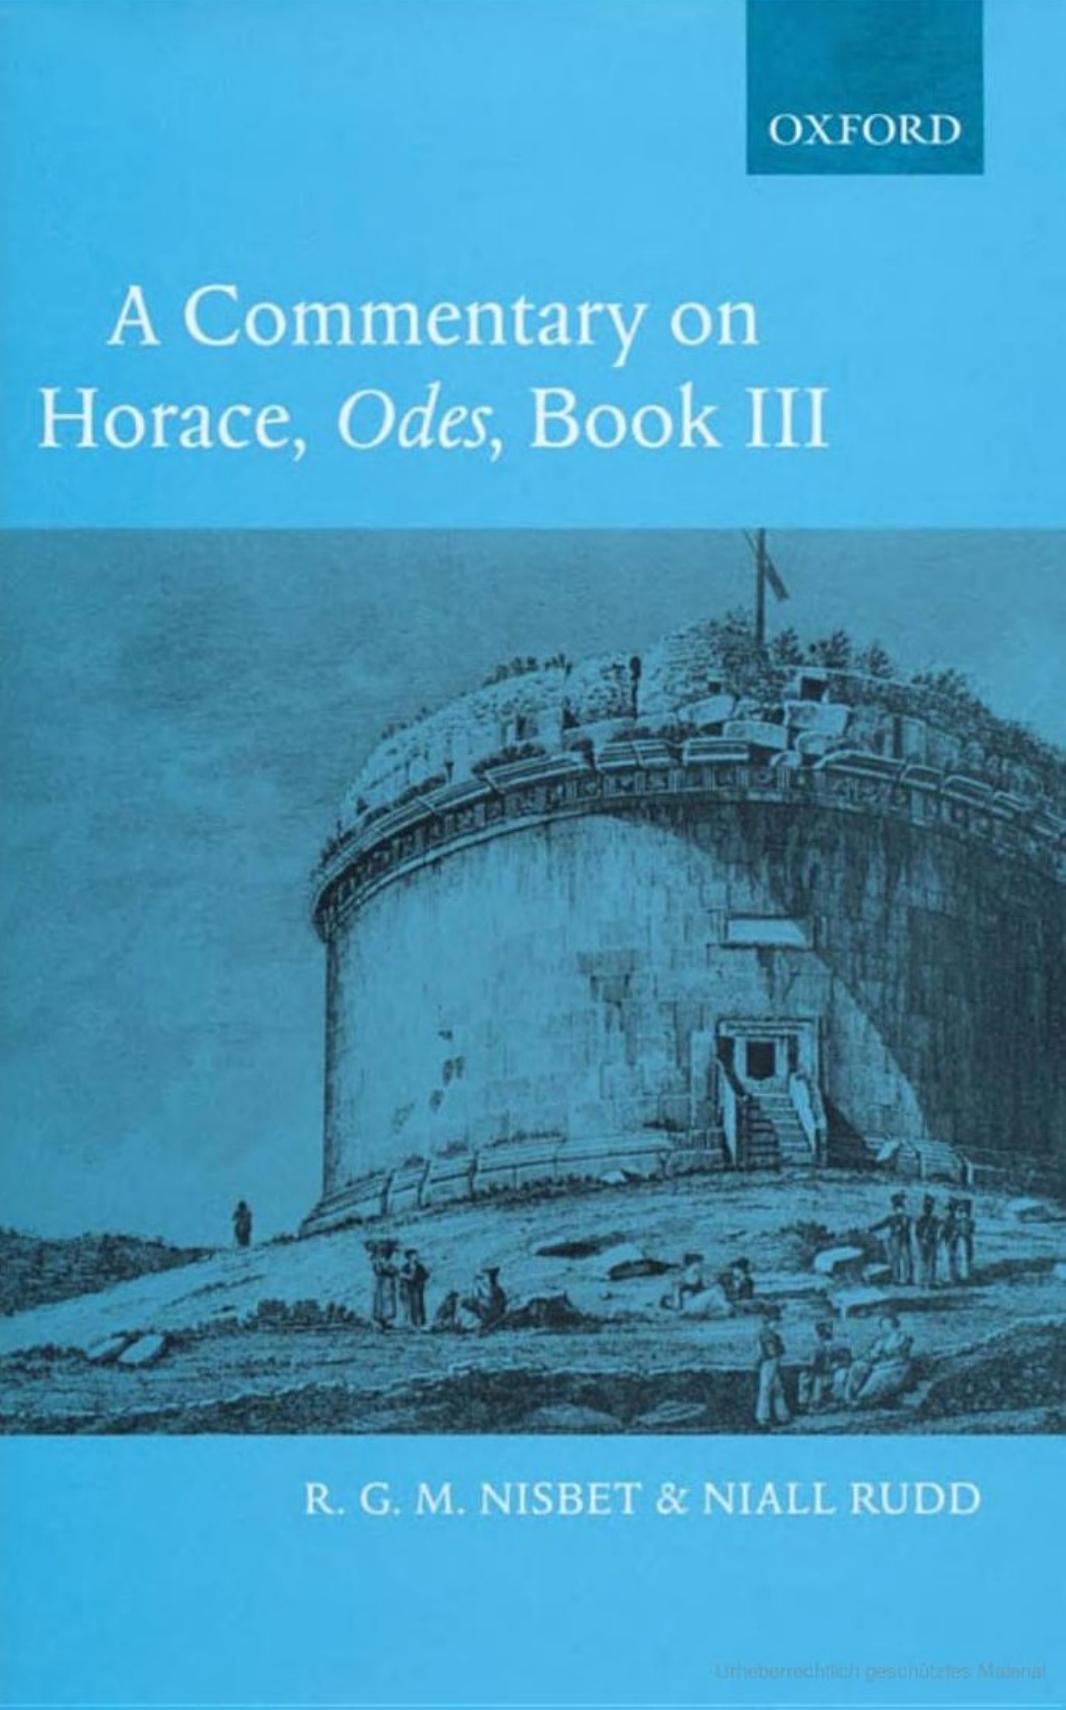 A Commentary on Horace: Odes